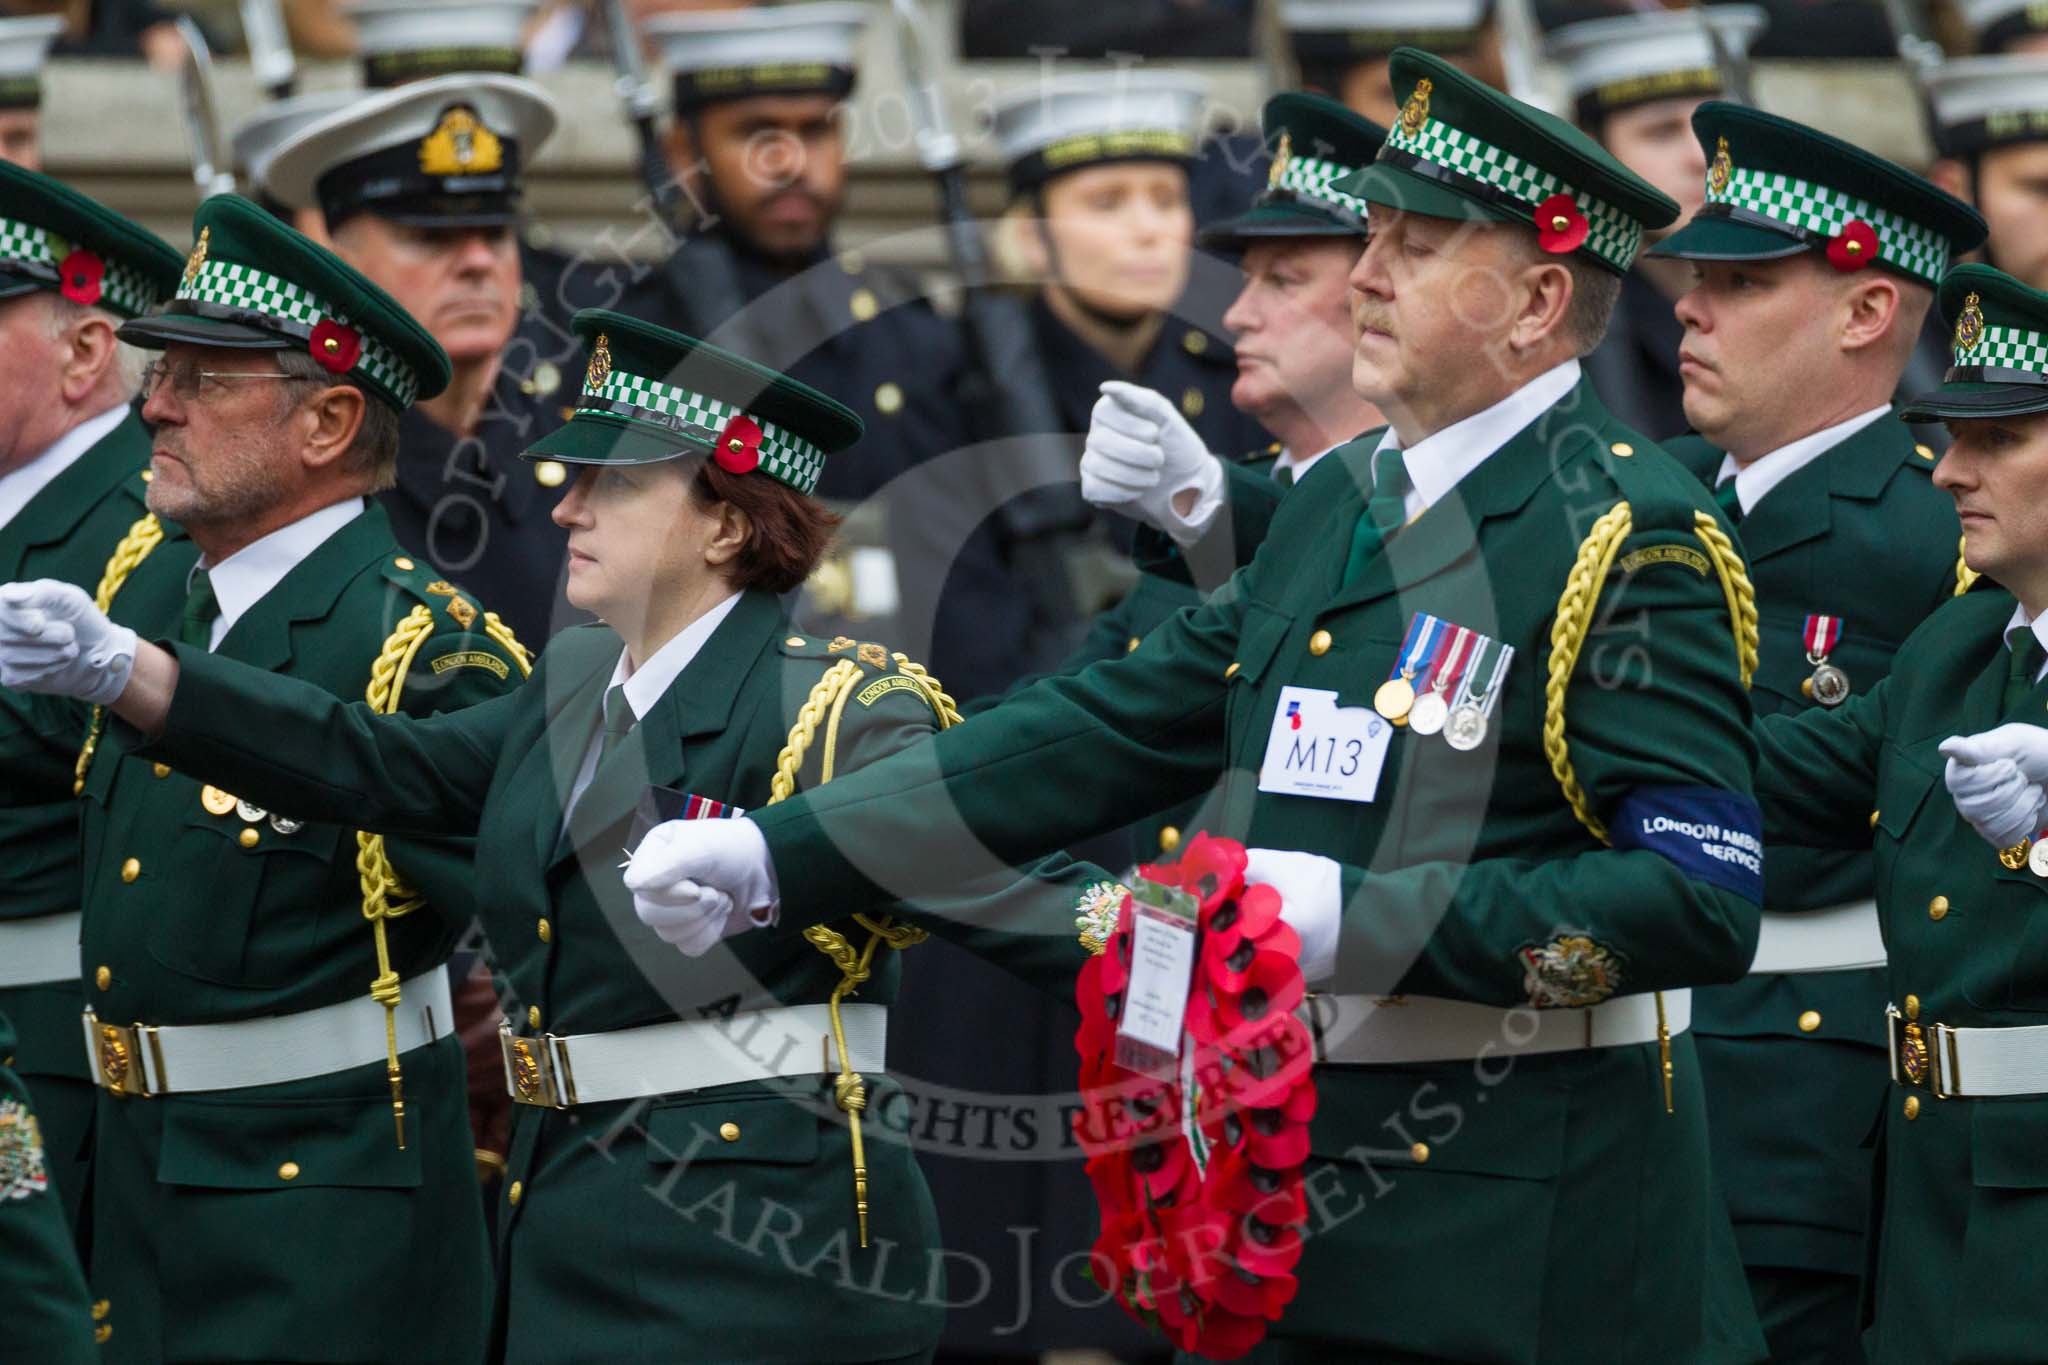 Remembrance Sunday at the Cenotaph 2015: Group M13, London Ambulance Service NHS Trust.
Cenotaph, Whitehall, London SW1,
London,
Greater London,
United Kingdom,
on 08 November 2015 at 12:16, image #1491